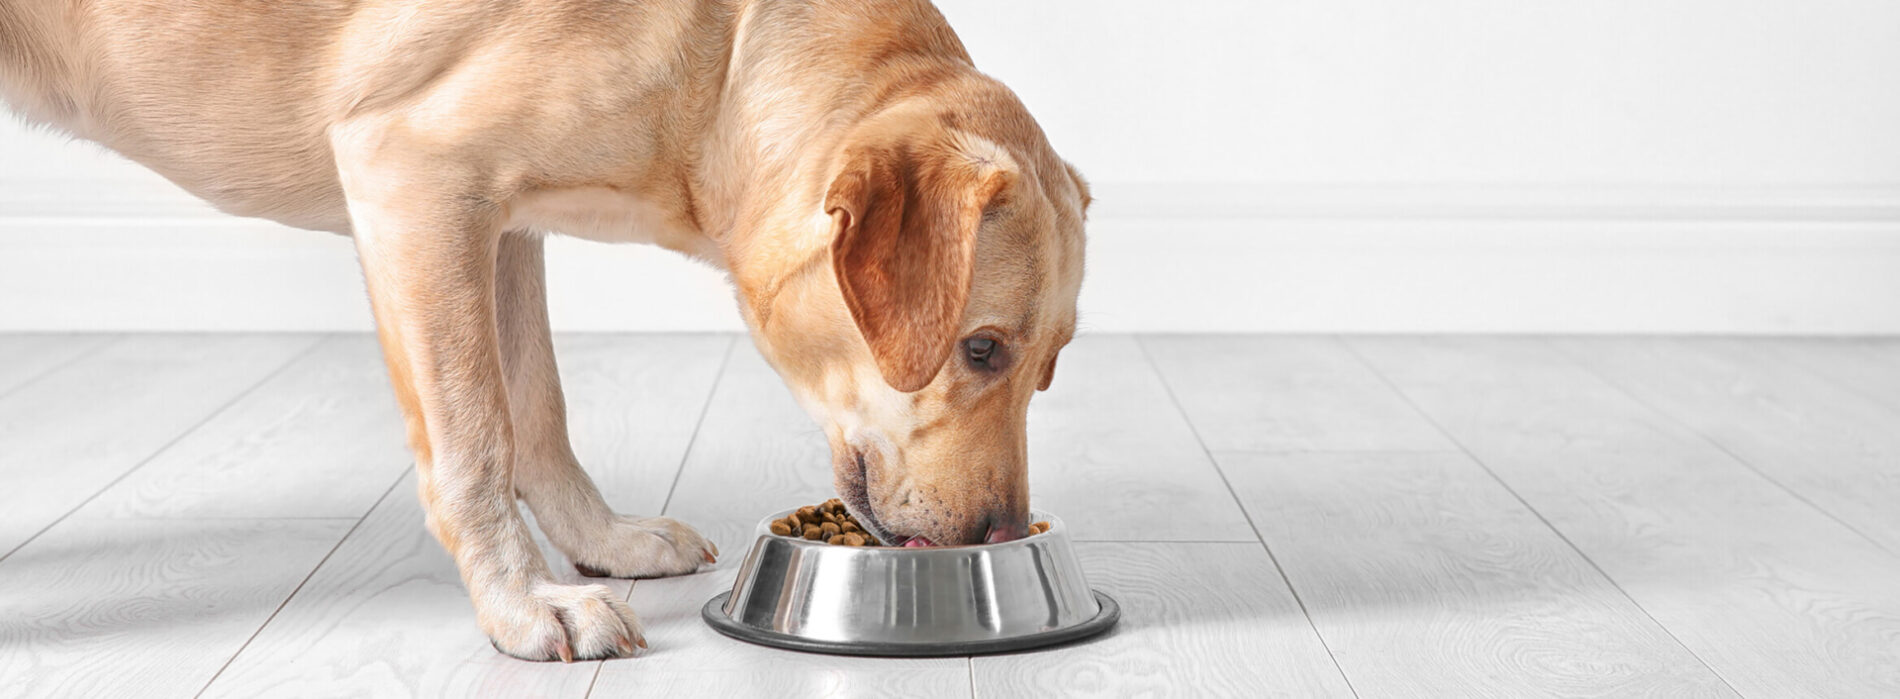 A dog eating pet food. McCownGordon completed a grind room expansion for a global leader in the pet food industry.